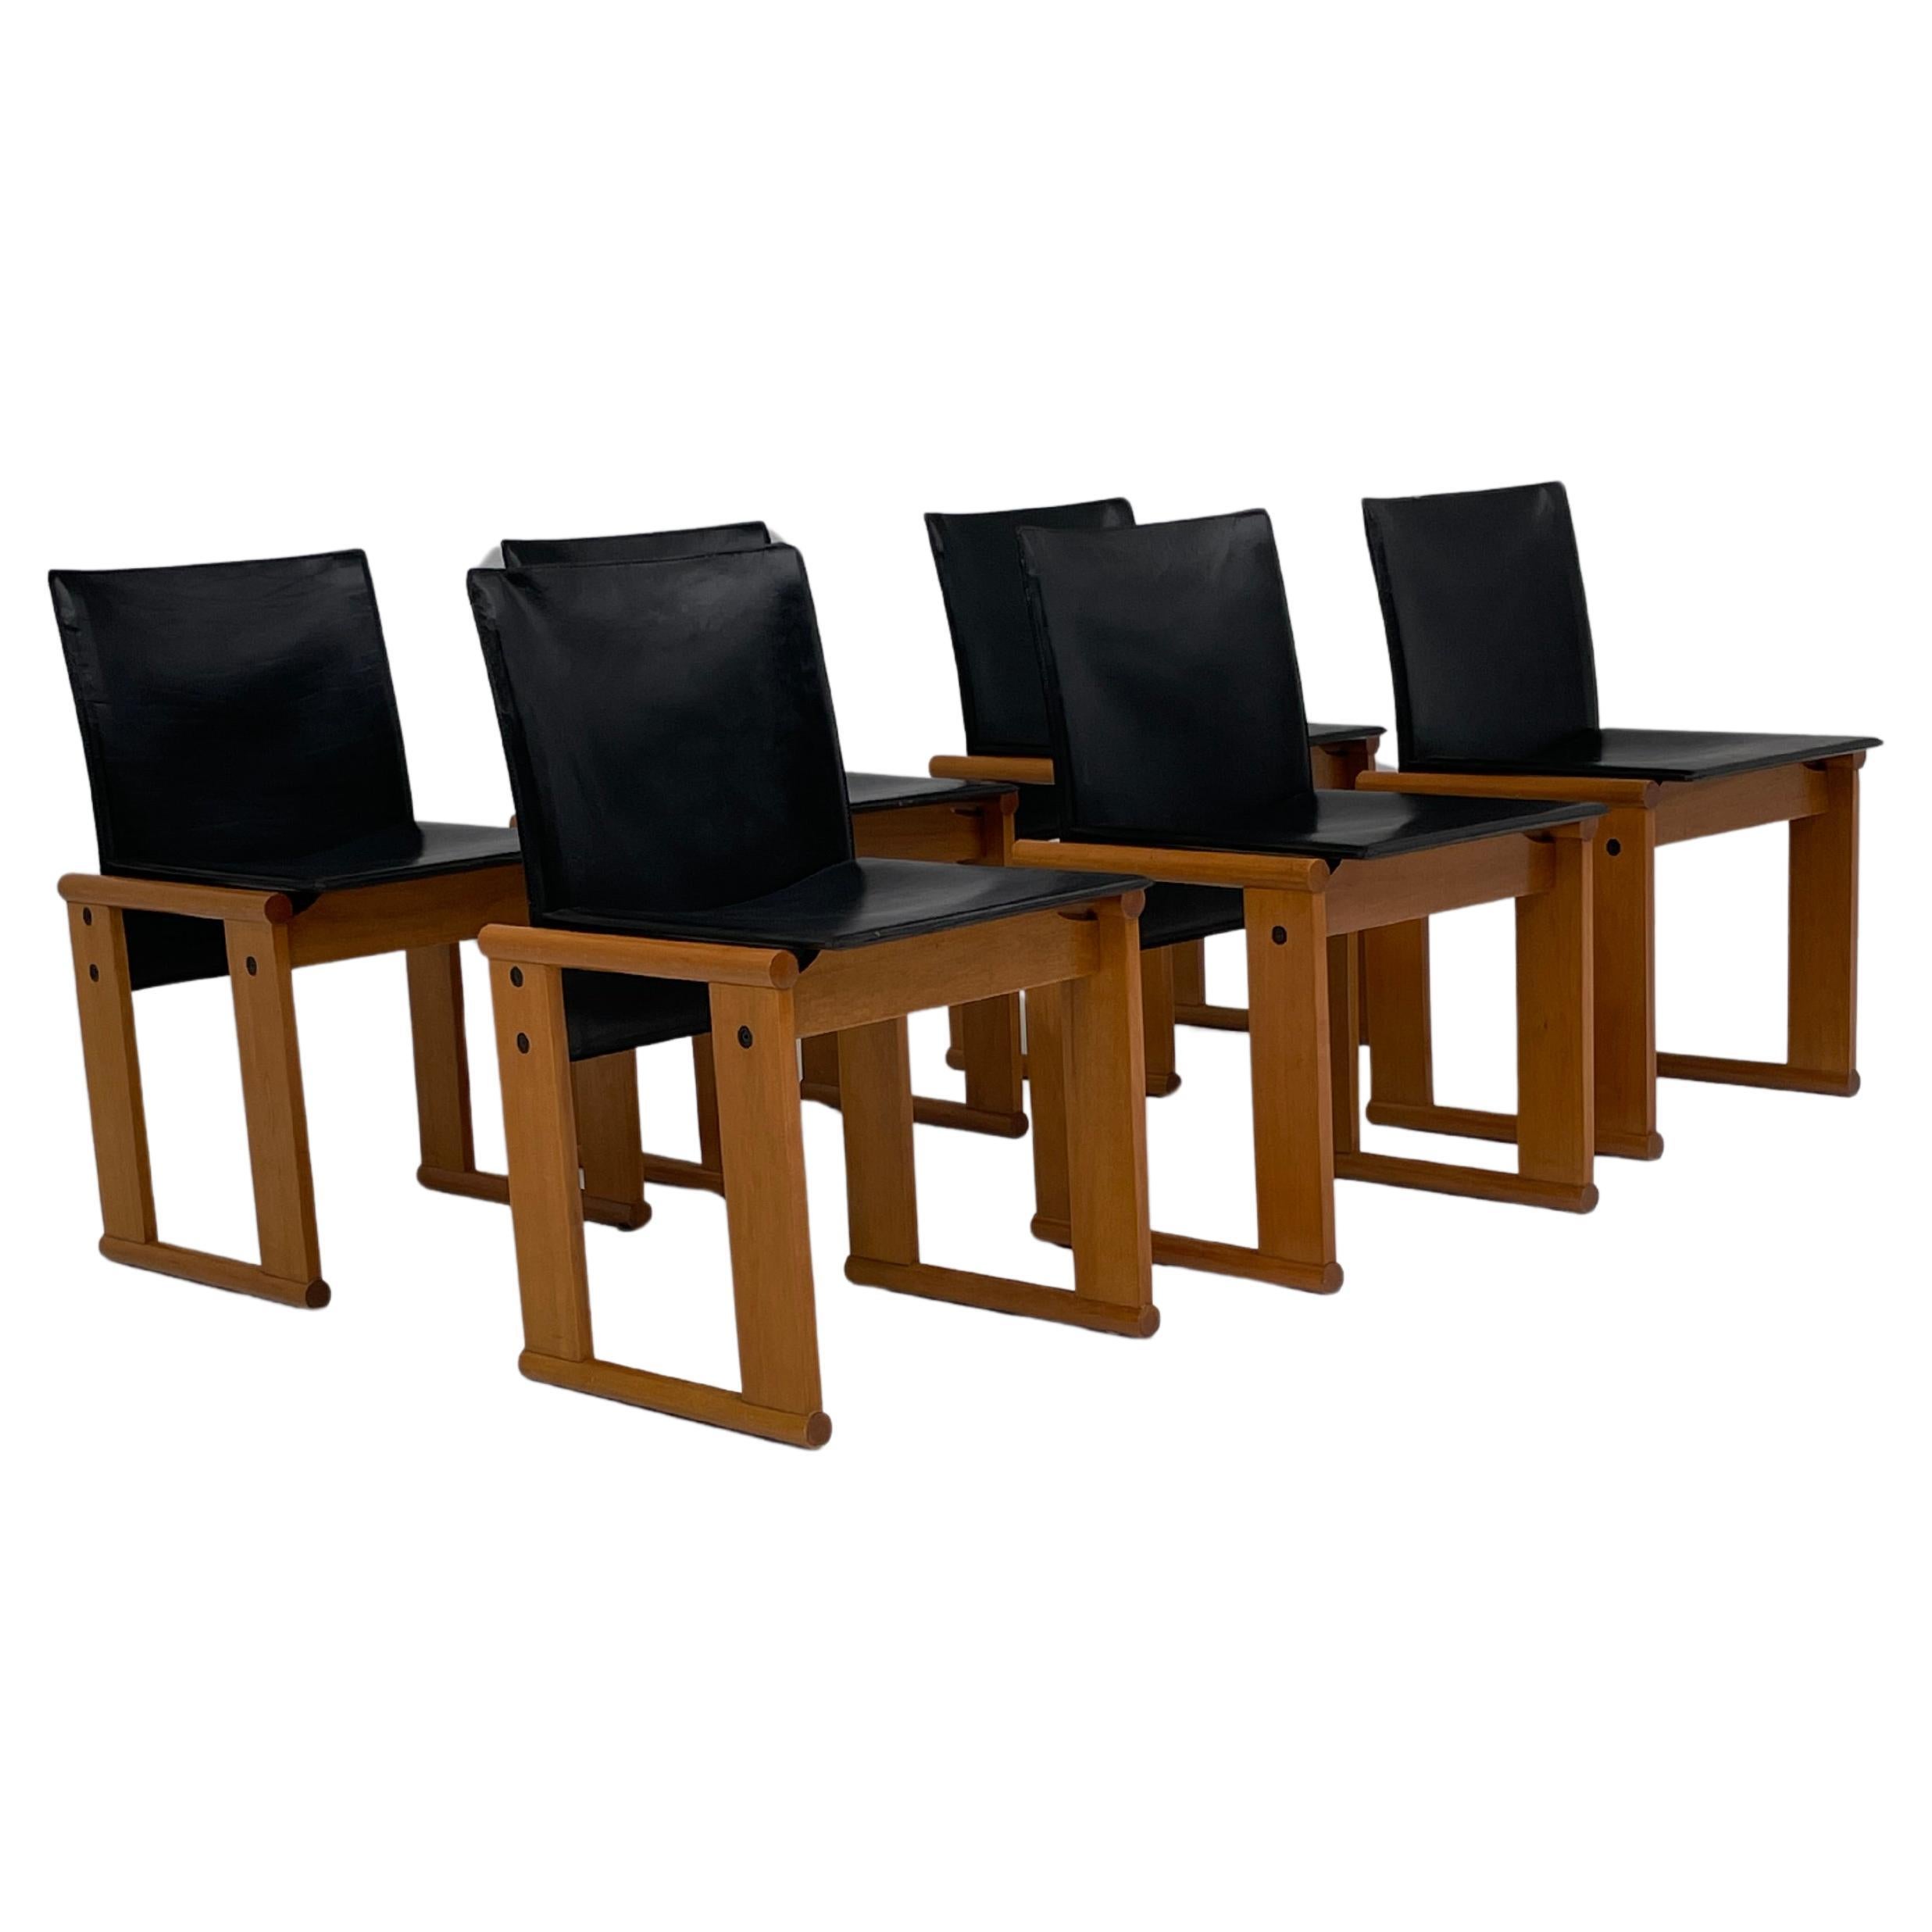 Set of 6 Monk chairs by Afra & Tobia Scarpa for Molteni, in black leather For Sale